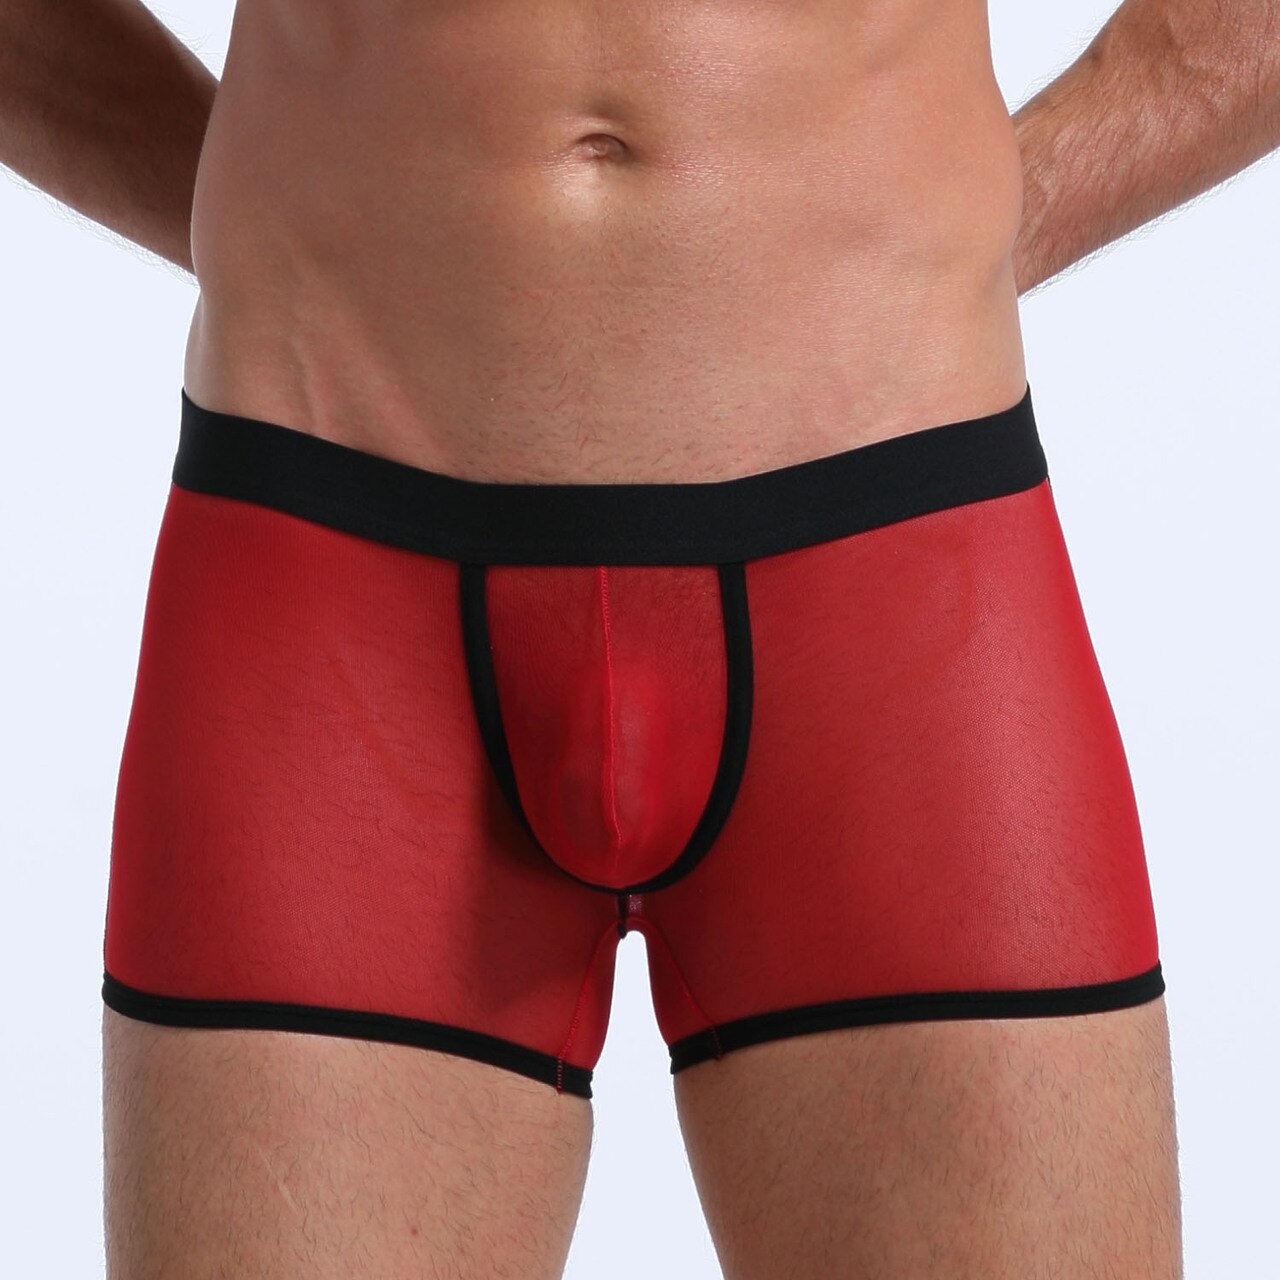 SALE - Mens Stretch Mesh Sheer Boxer Briefs with Pouch Front Red